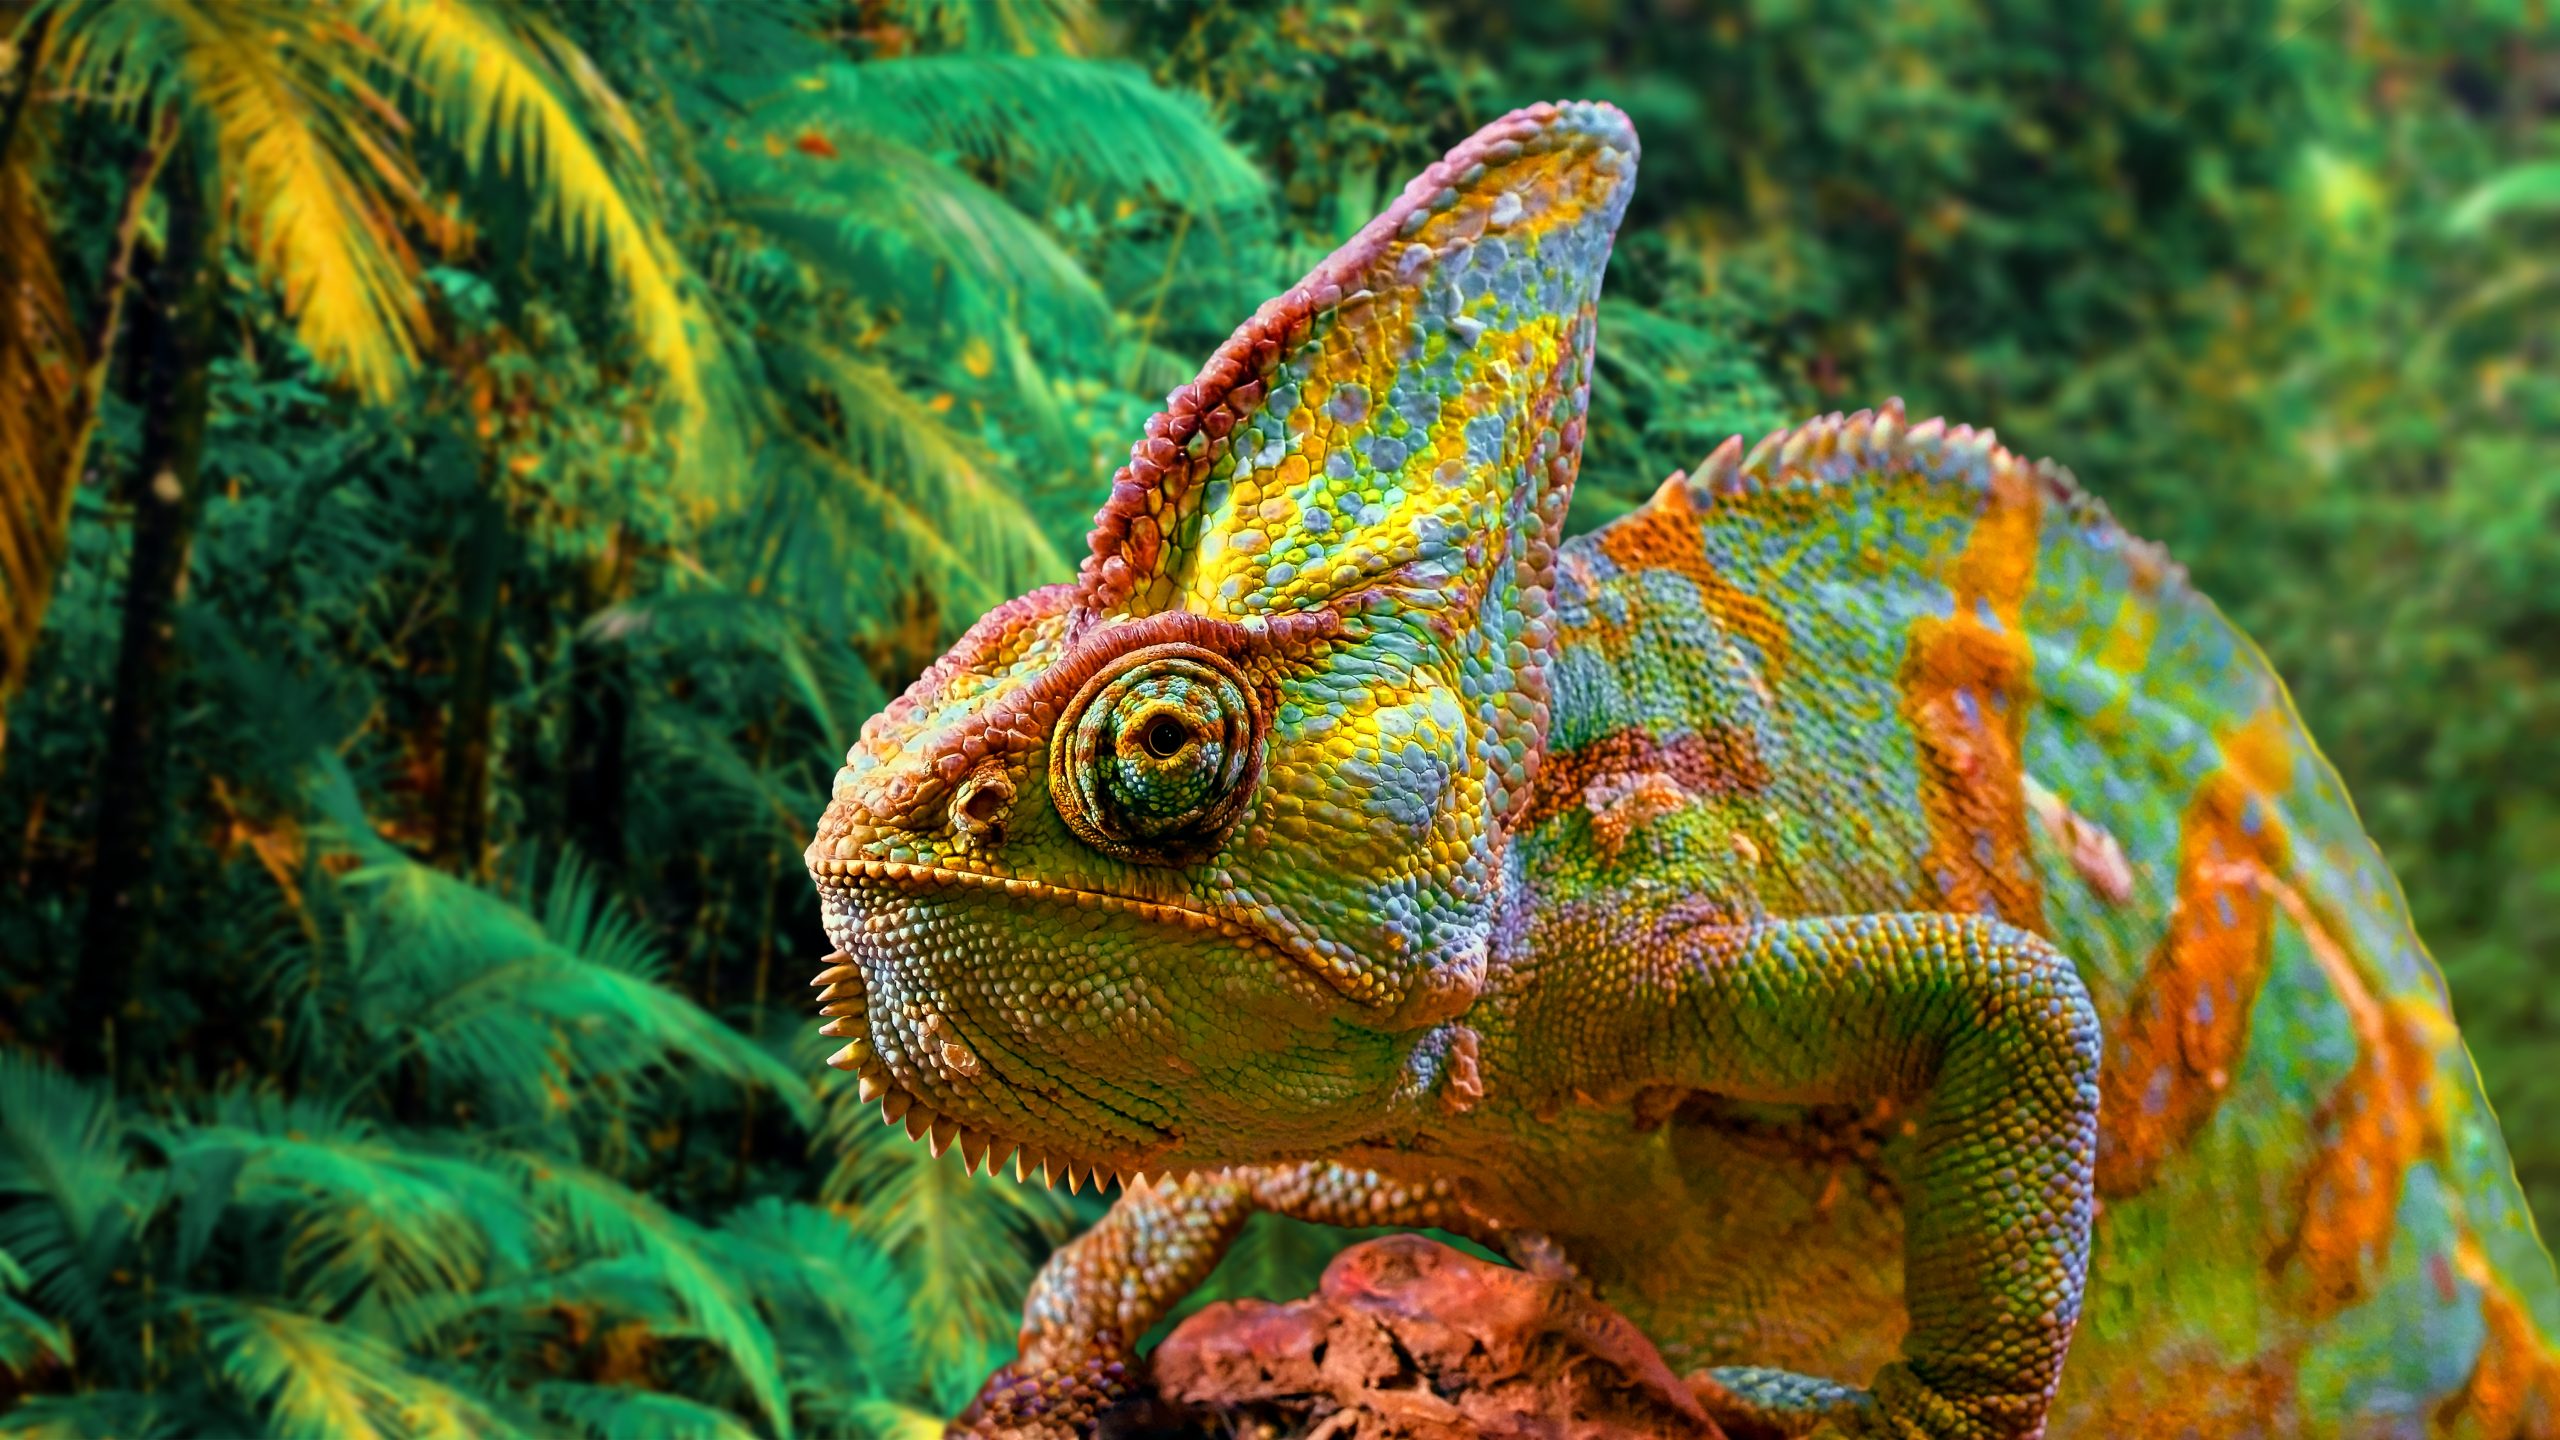 A,Colorful,Close-up,Chameleon,With,A,High,Crest,On,Its